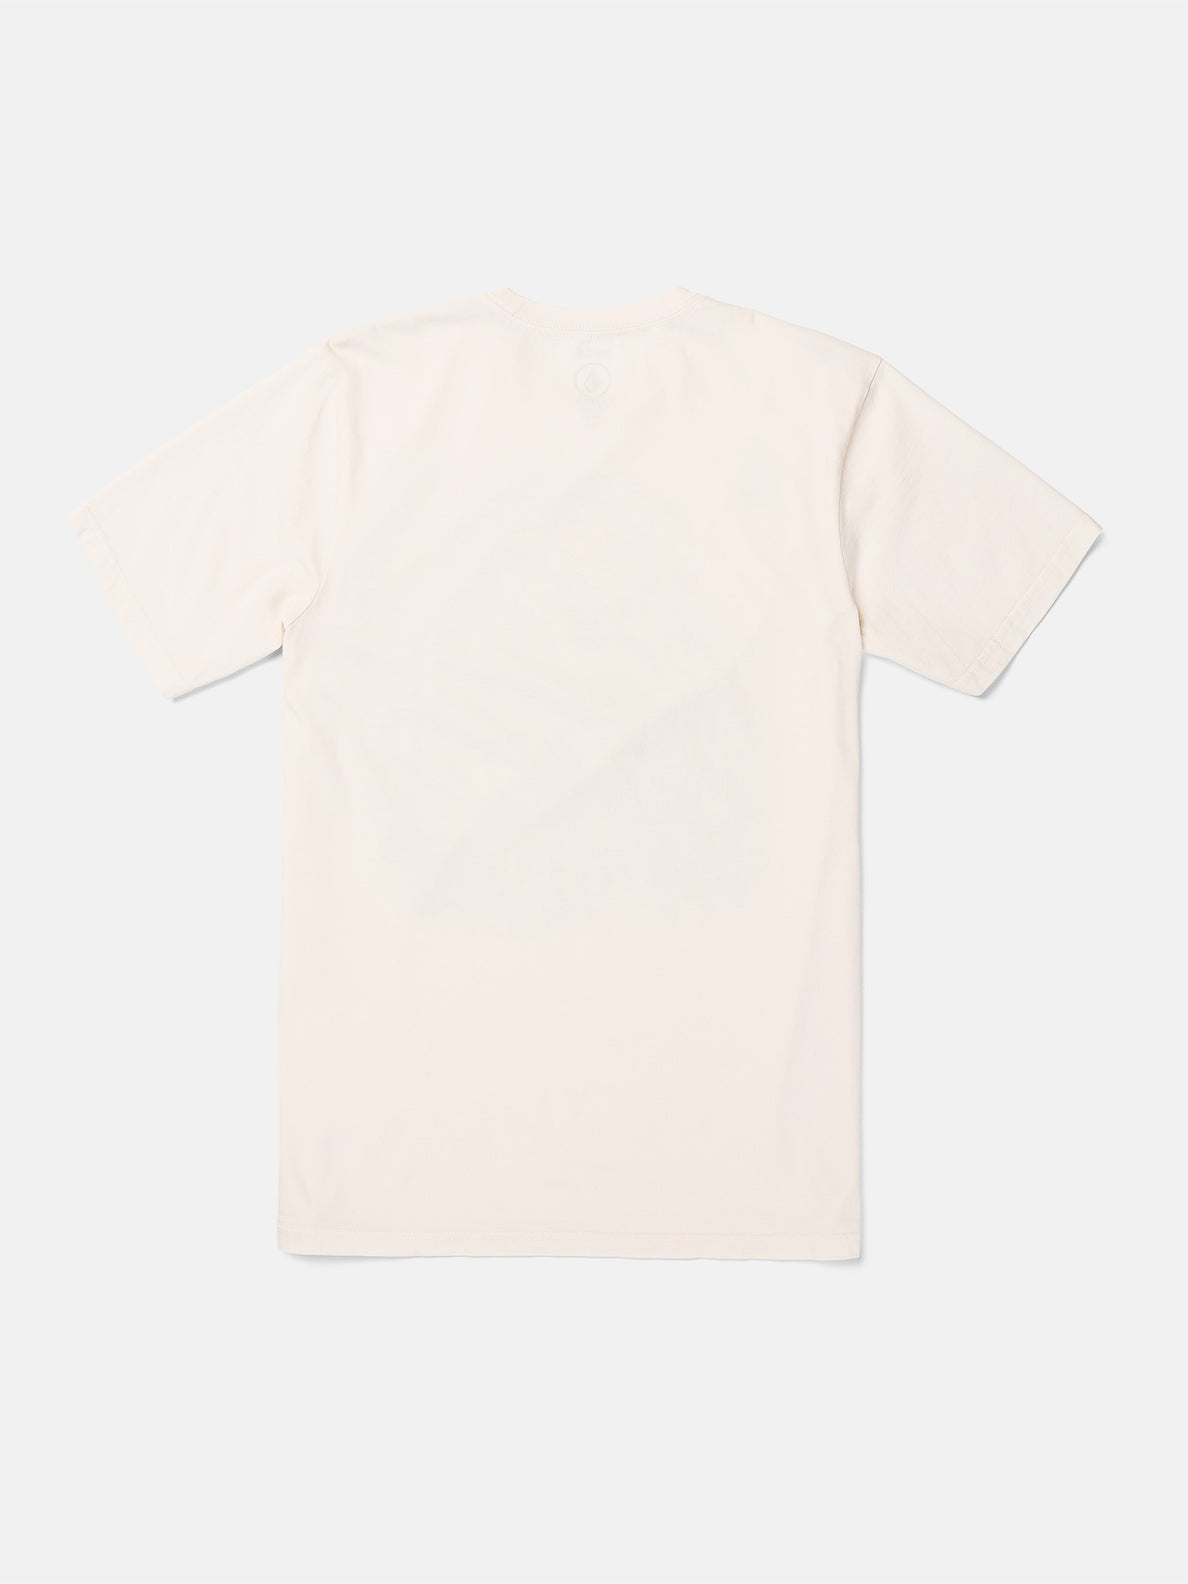 Wall Puncher Short Sleeve Tee - Off White